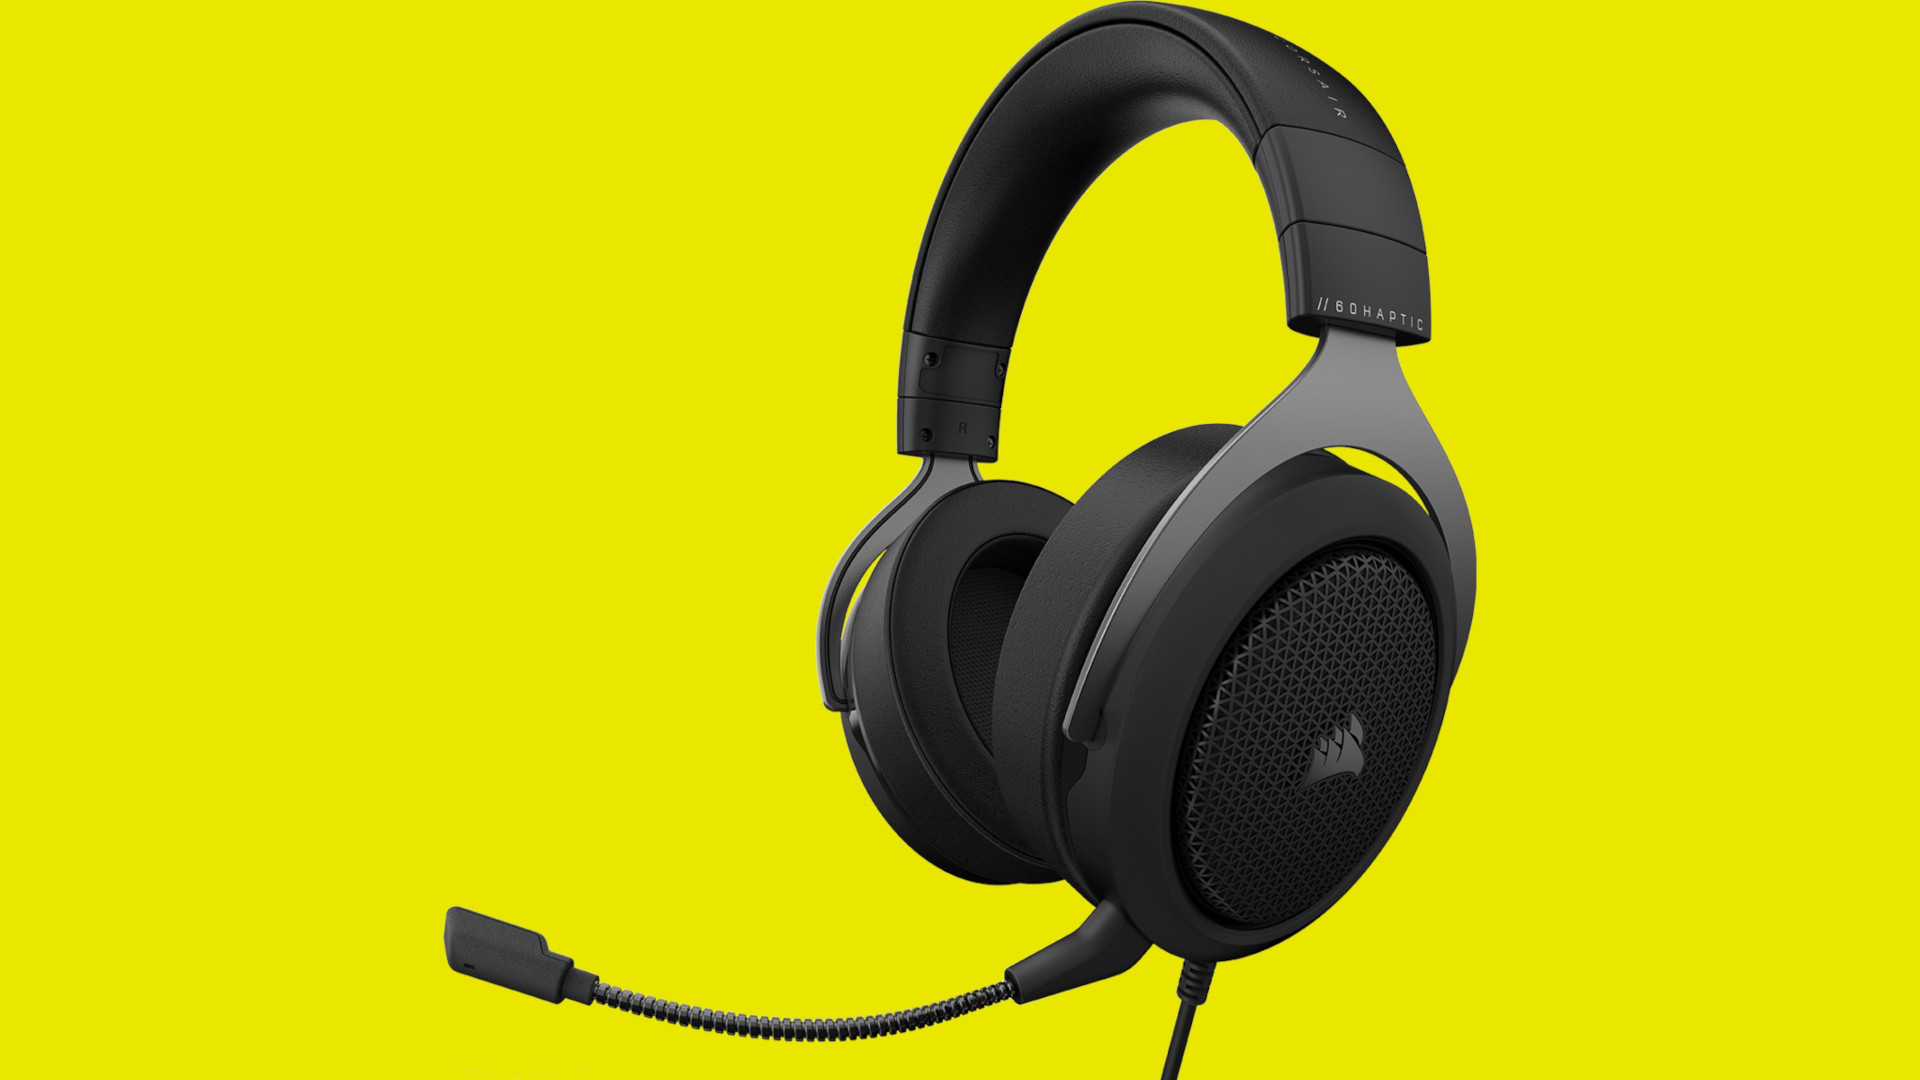 Get 50% off the Corsair HS60 Haptic gaming headset with this code